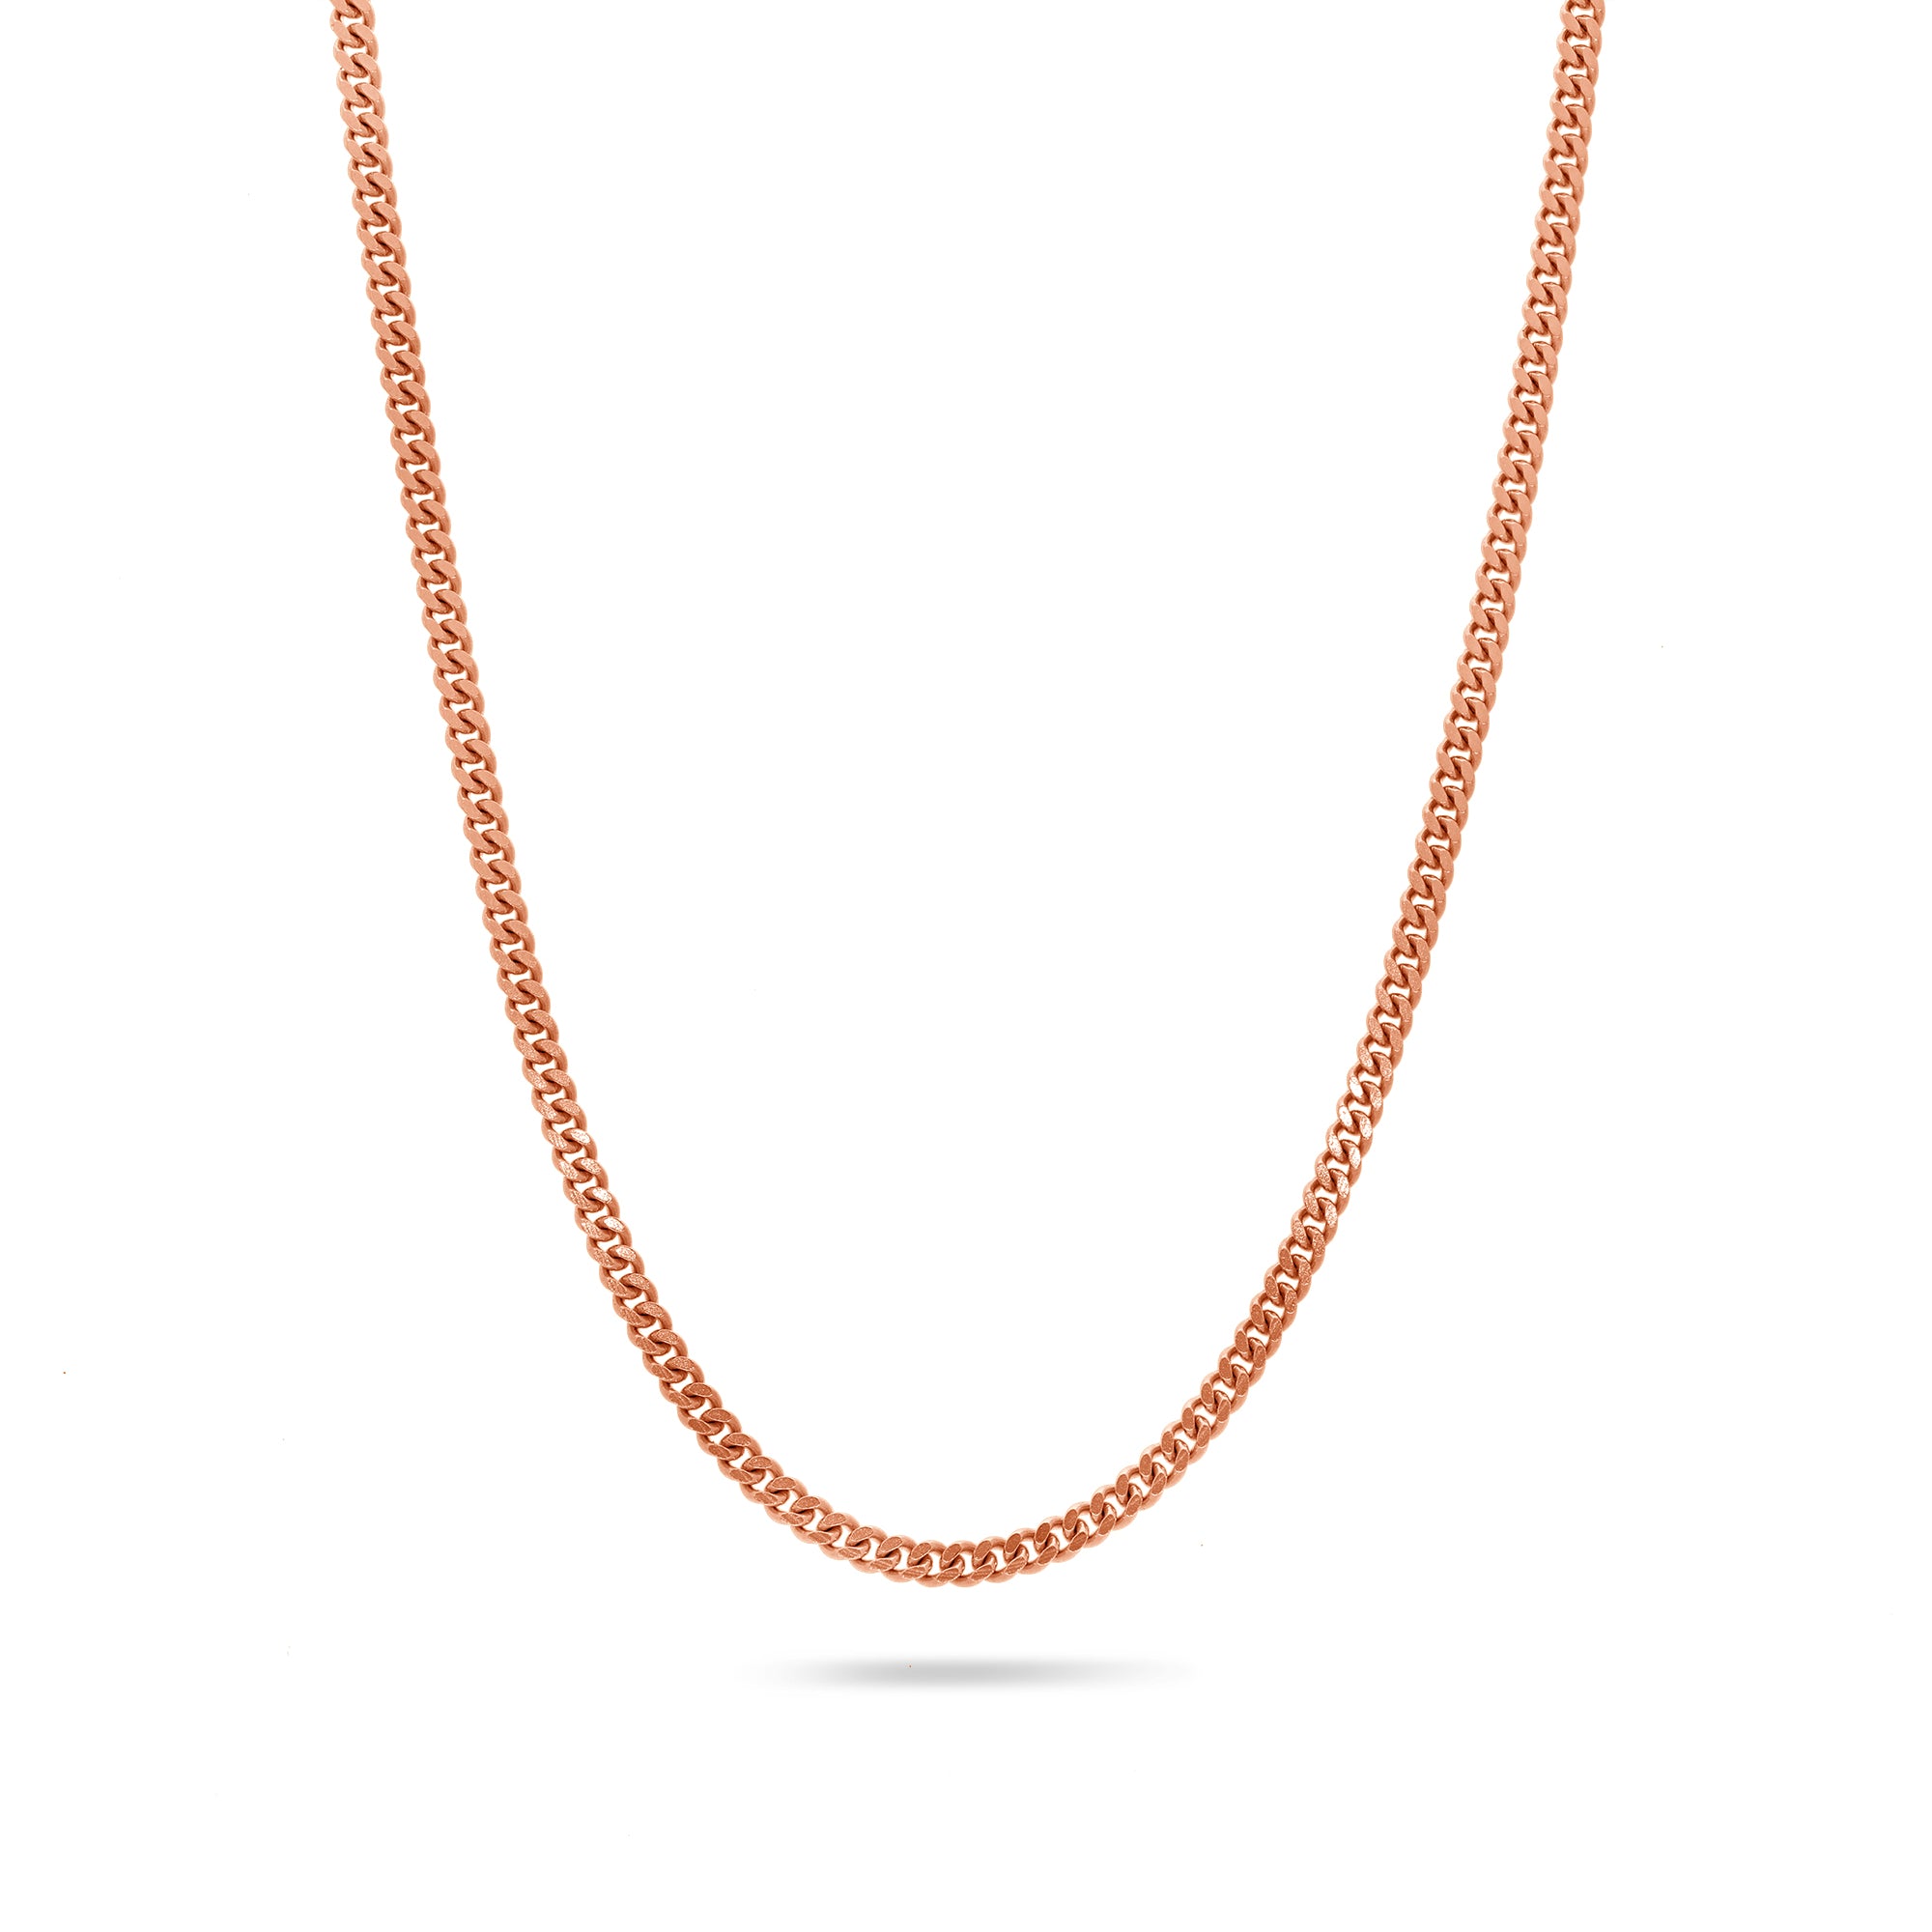 Rose Gold Titanium Stainless Steel Cuban Link Chain Necklace